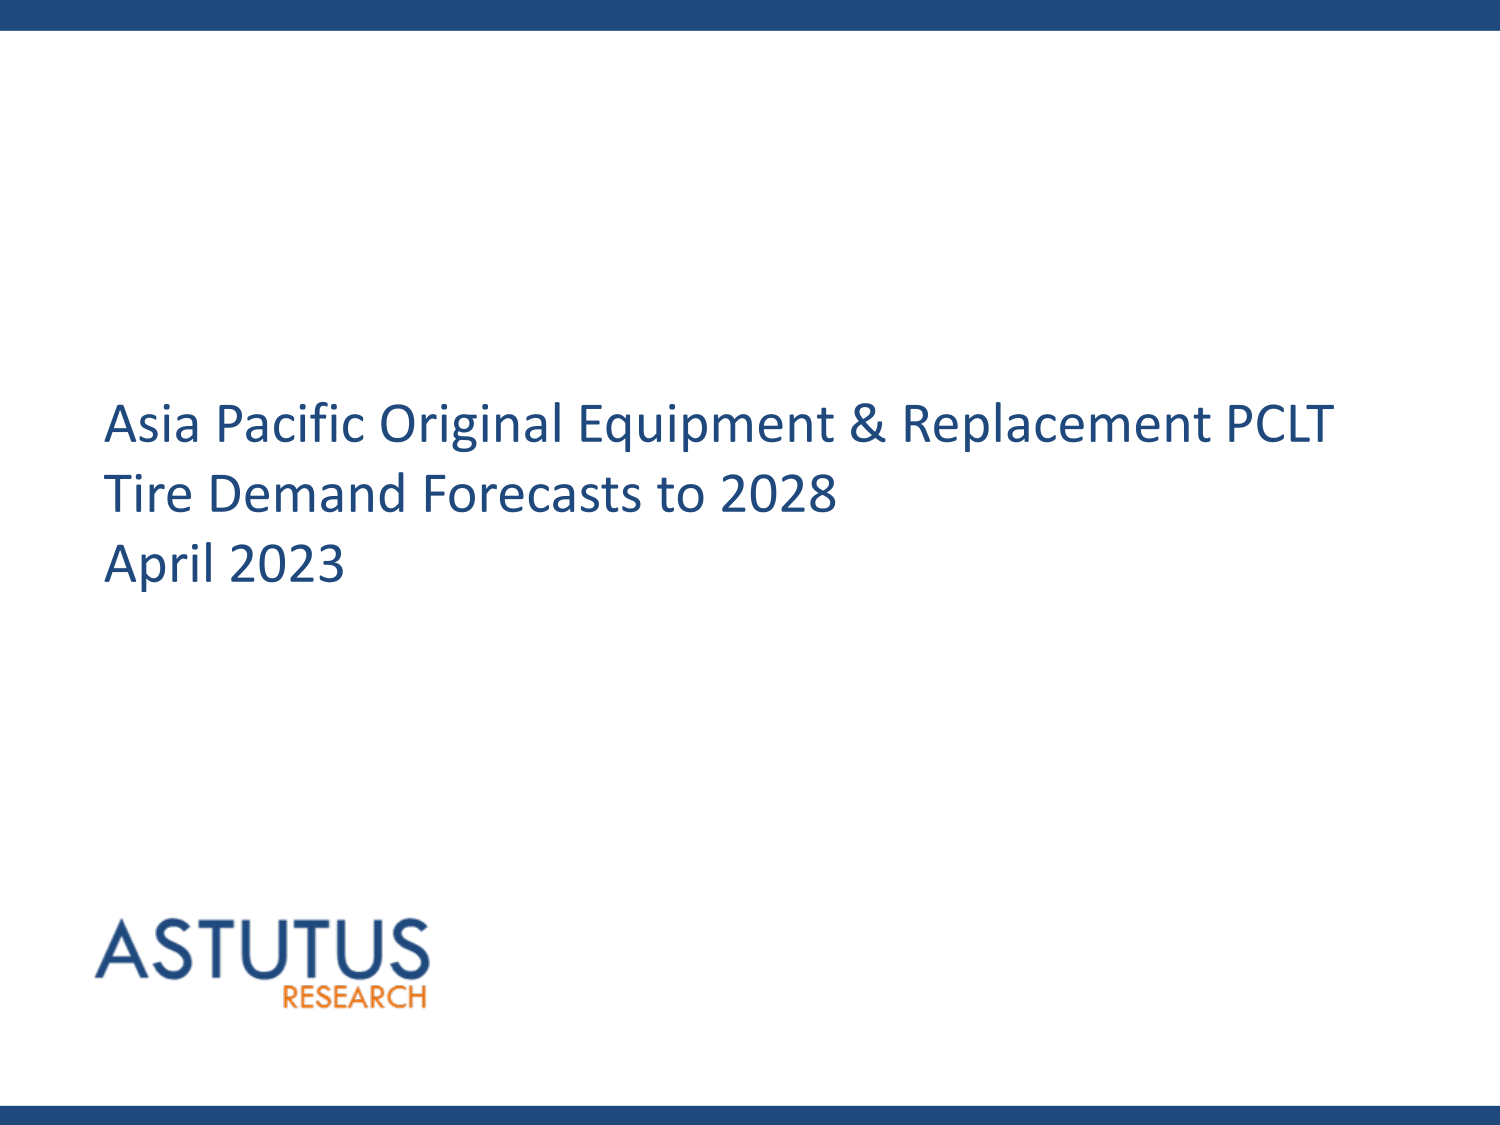 Asia Pacific Original Equipment & Replacement PCLT Tire Market Forecasts to 2028